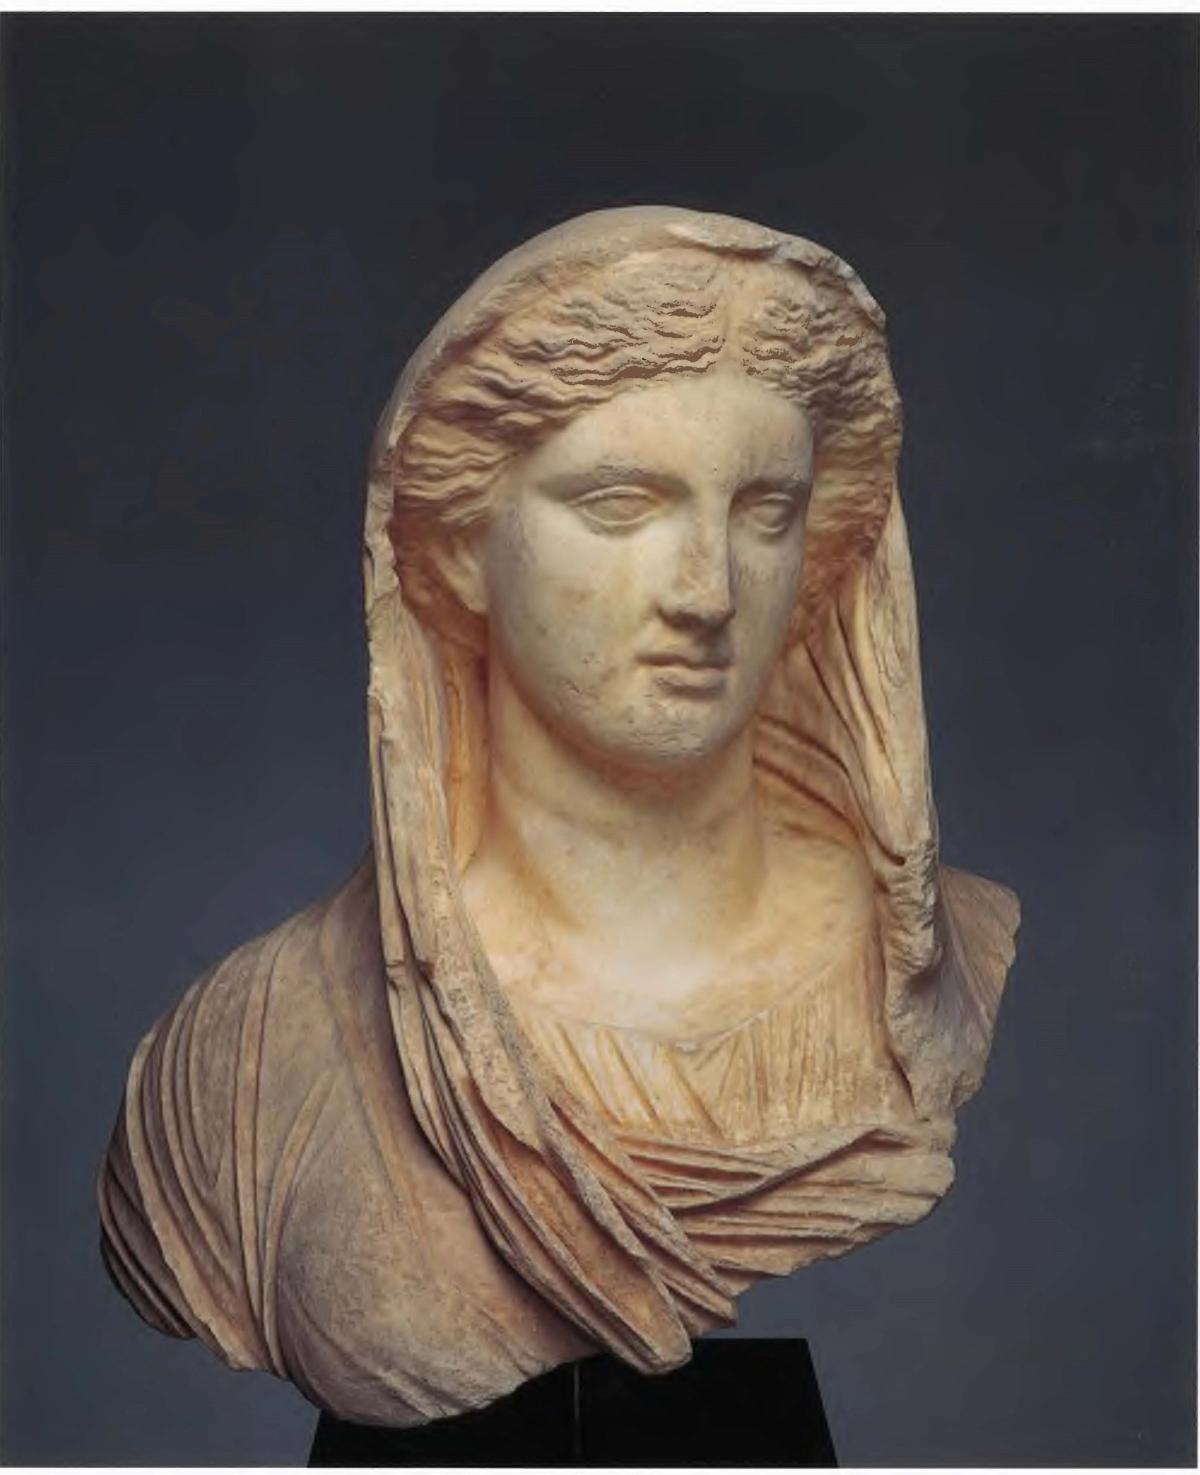 Female Bust, a restituted Libyan artefact Manhattan District Attorney’s Office